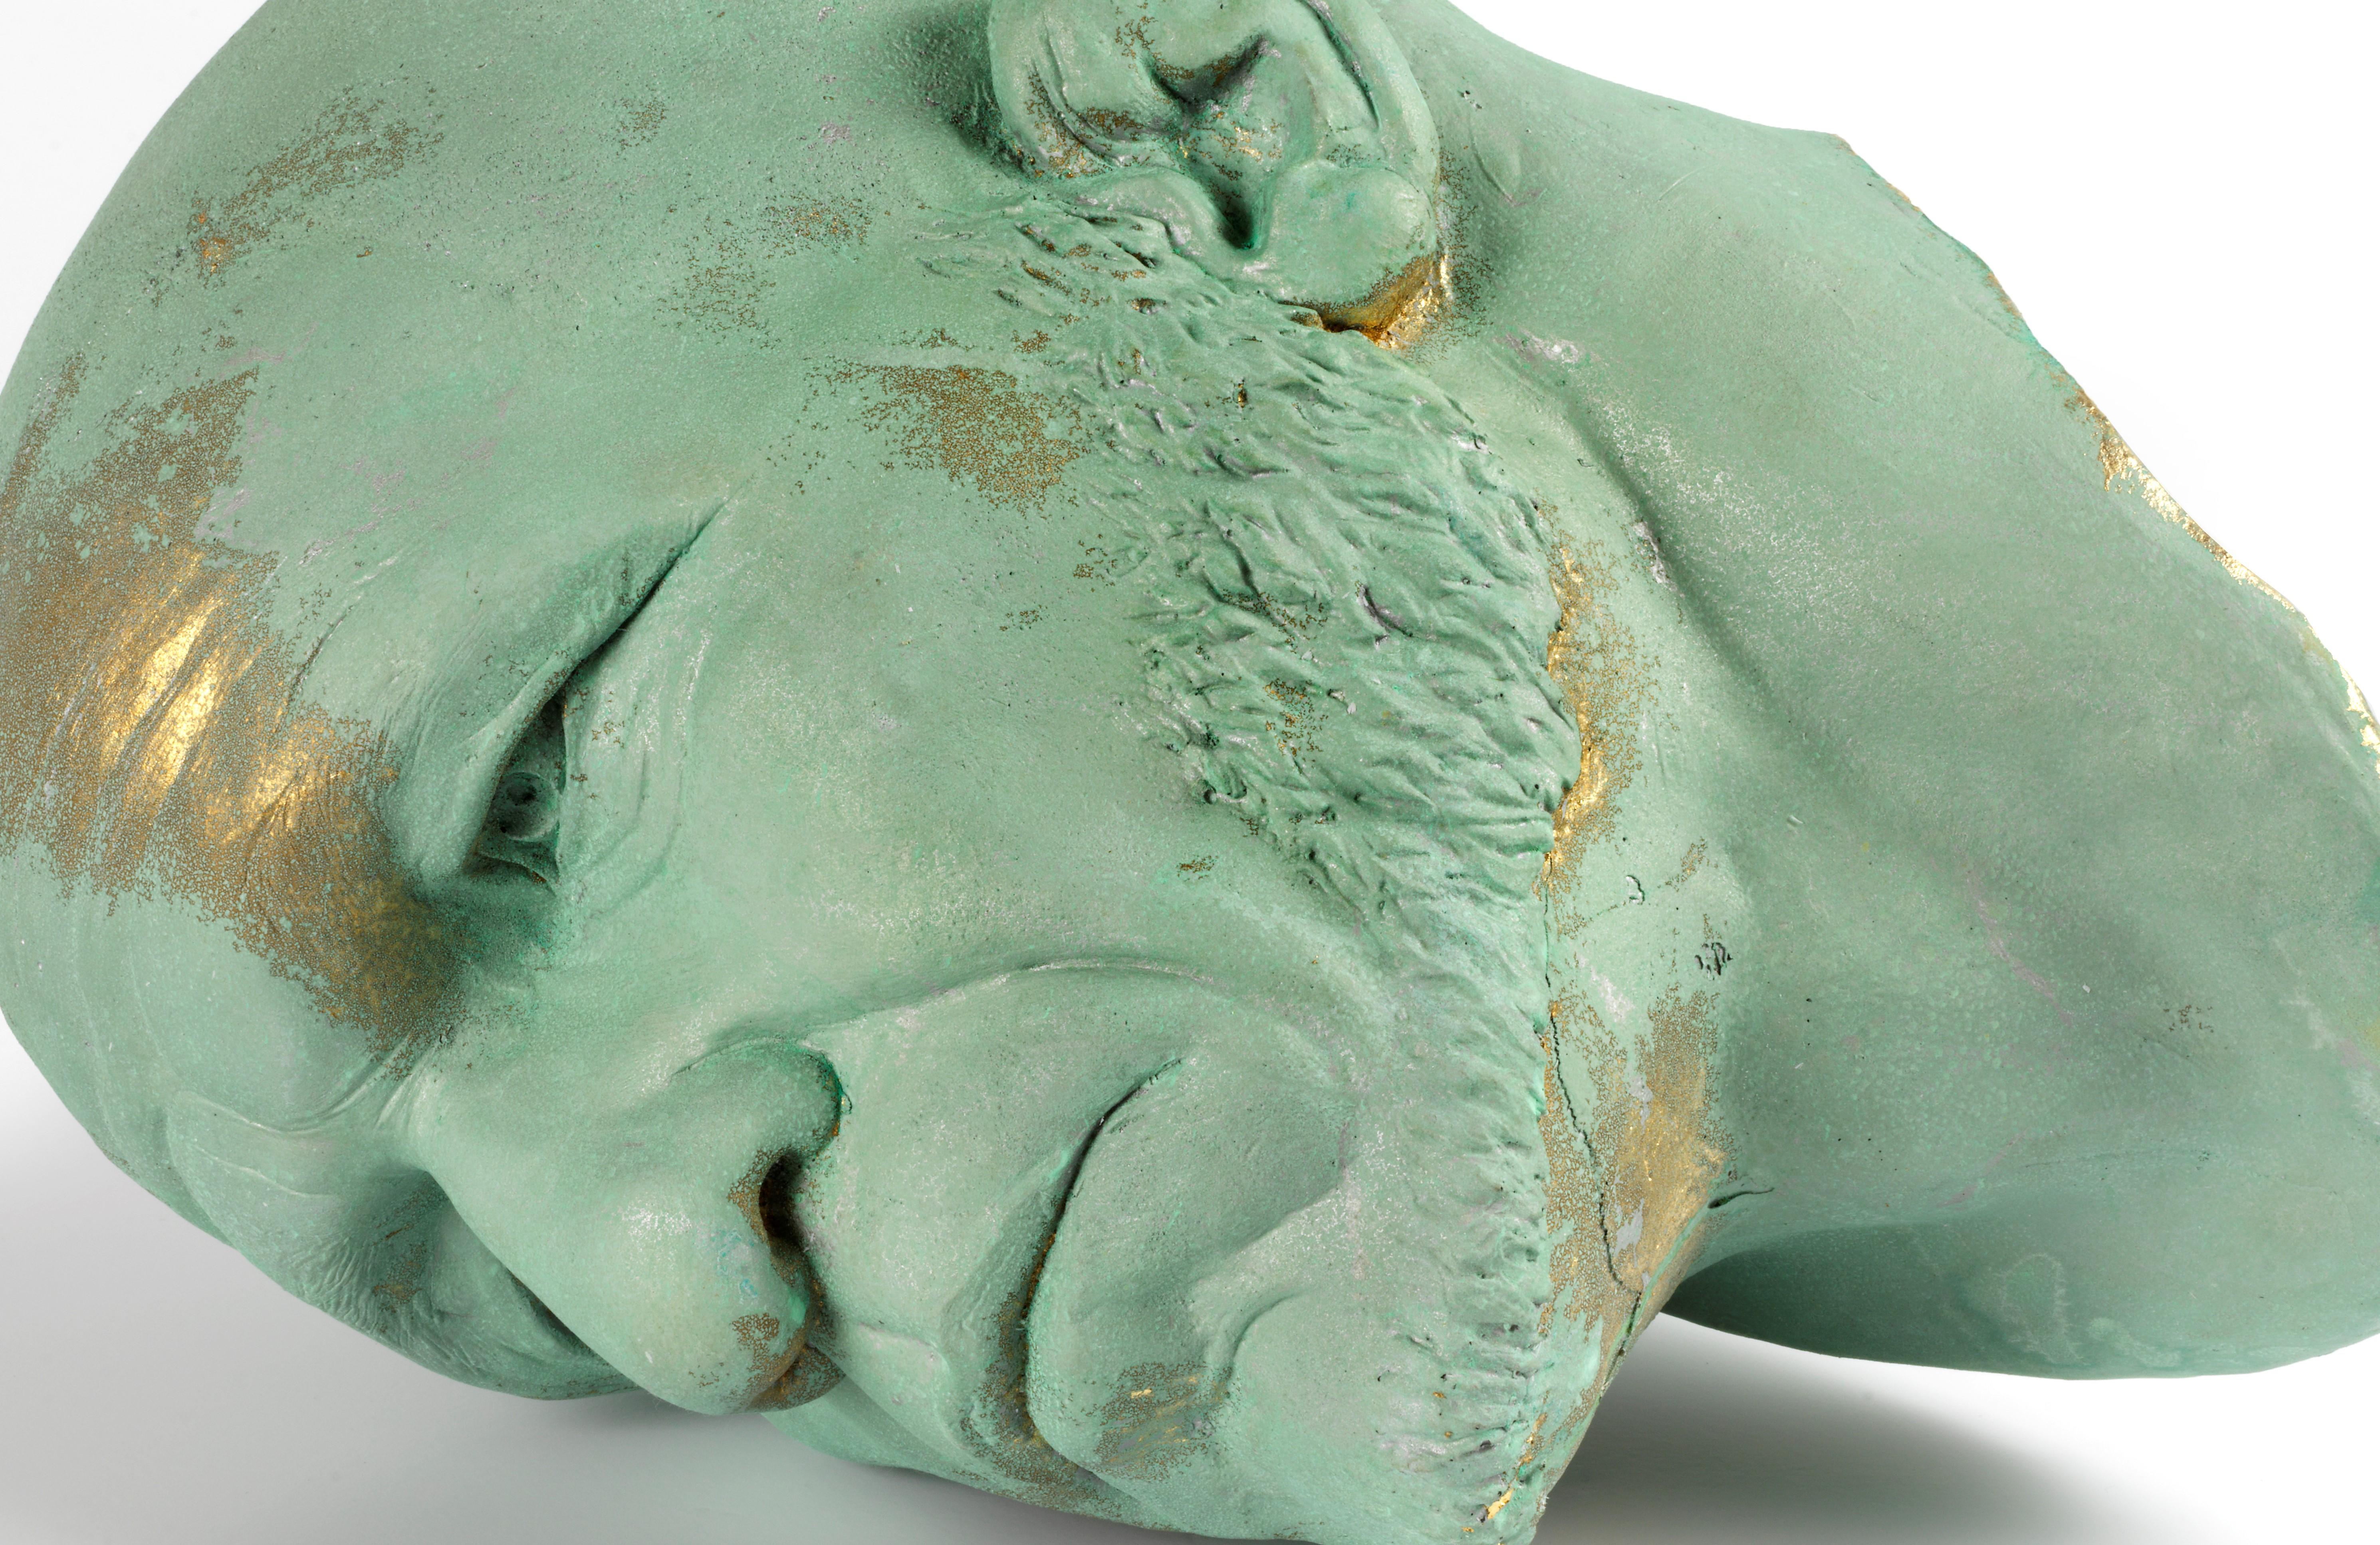 Cast The Black Road: Verdigris, Classical Male Bust, Resin, Patina and Gold Leaf